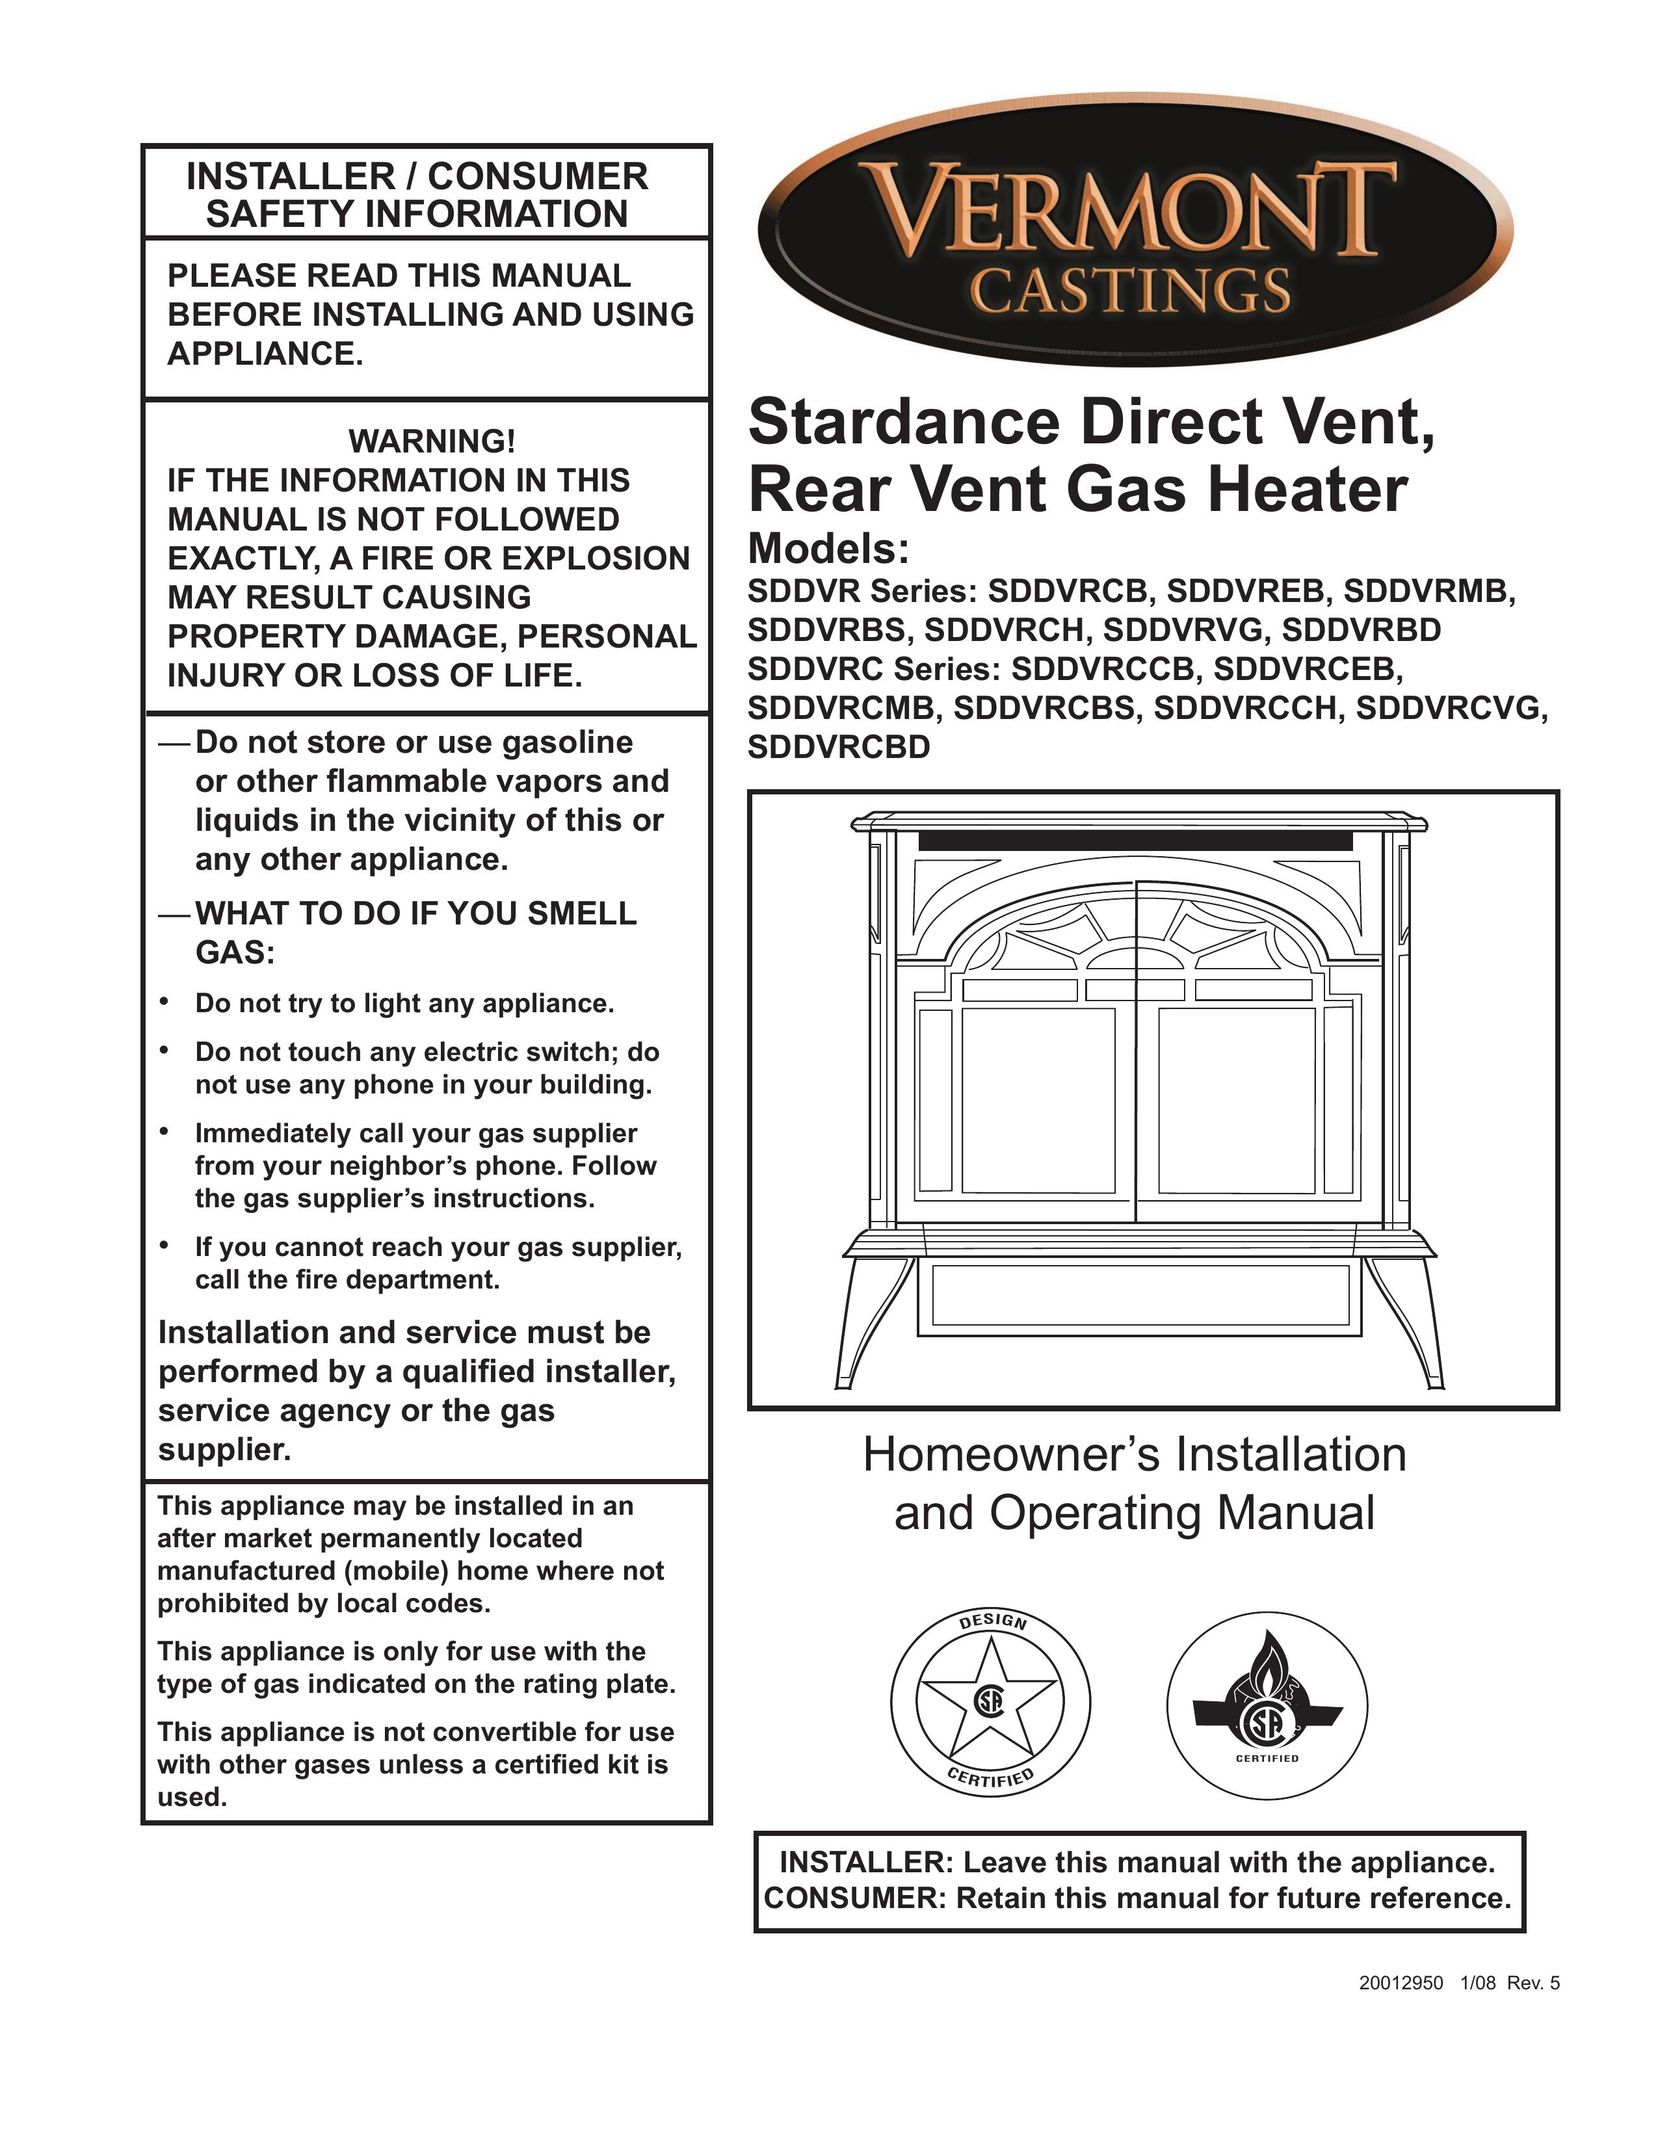 Vermont Casting SDDVRCBS Gas Heater User Manual